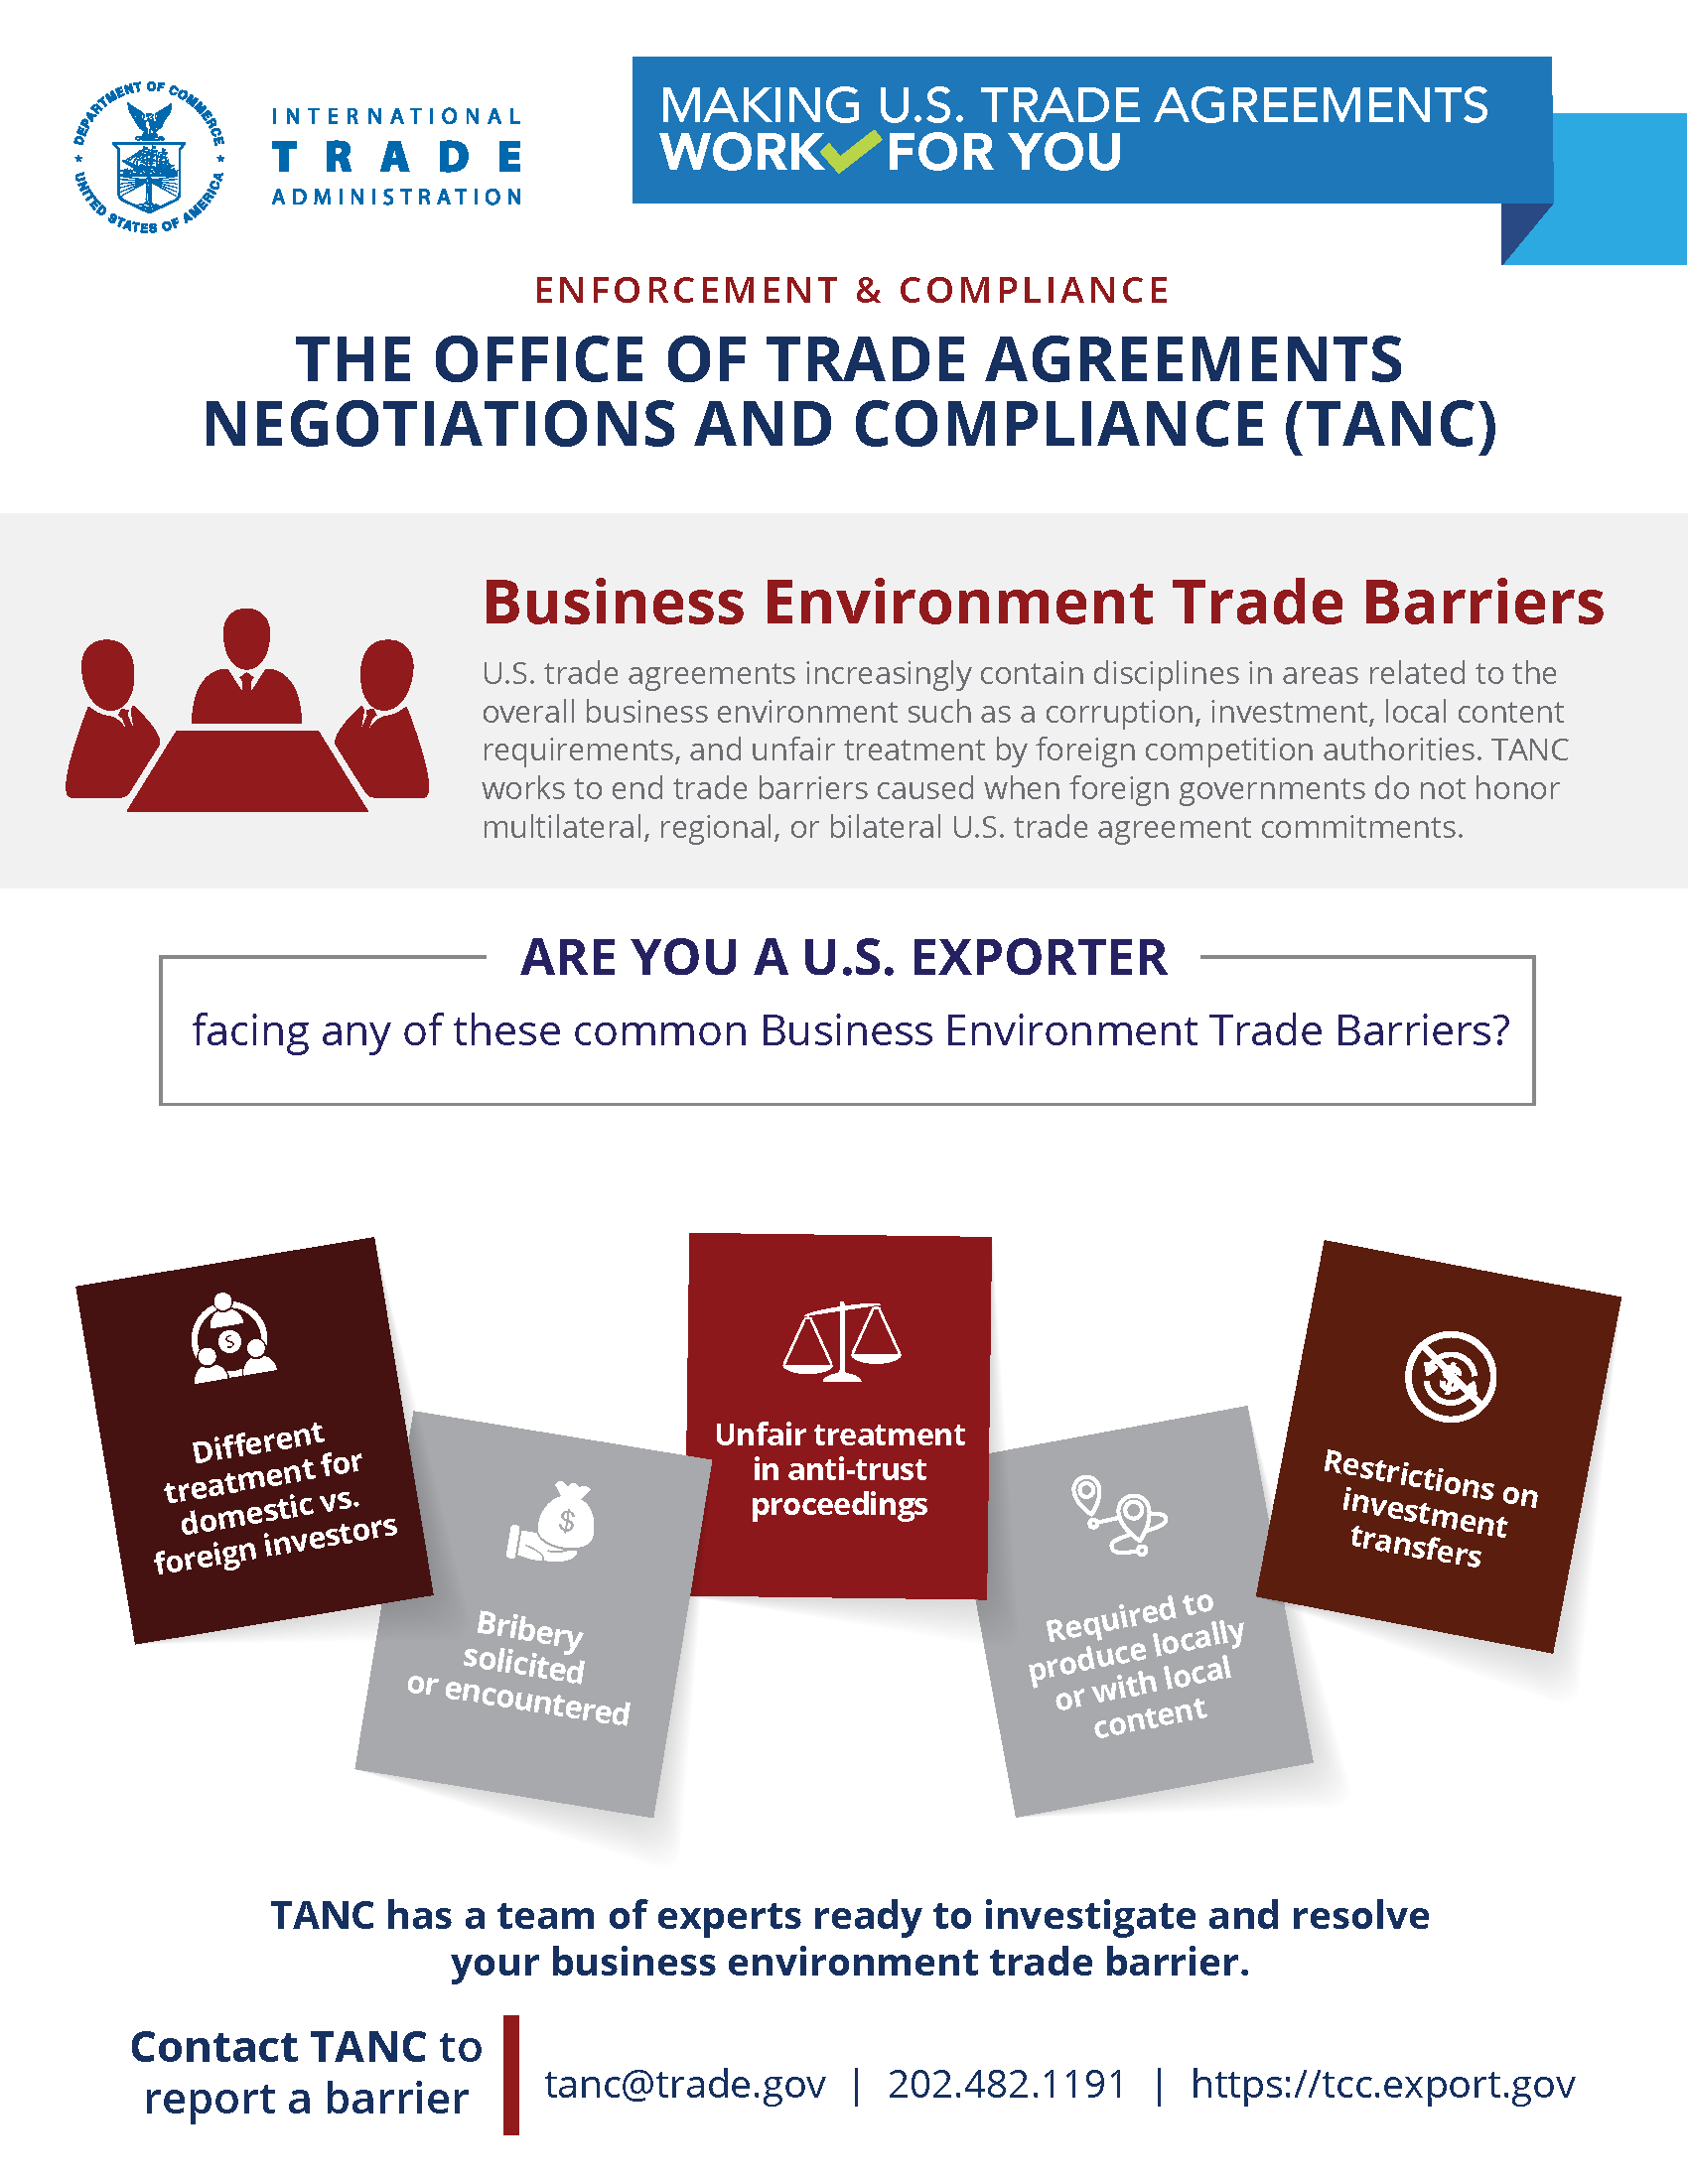 An infographic describing in plain English how to recognize when an exporter is facing a Business Environment Barrier. 